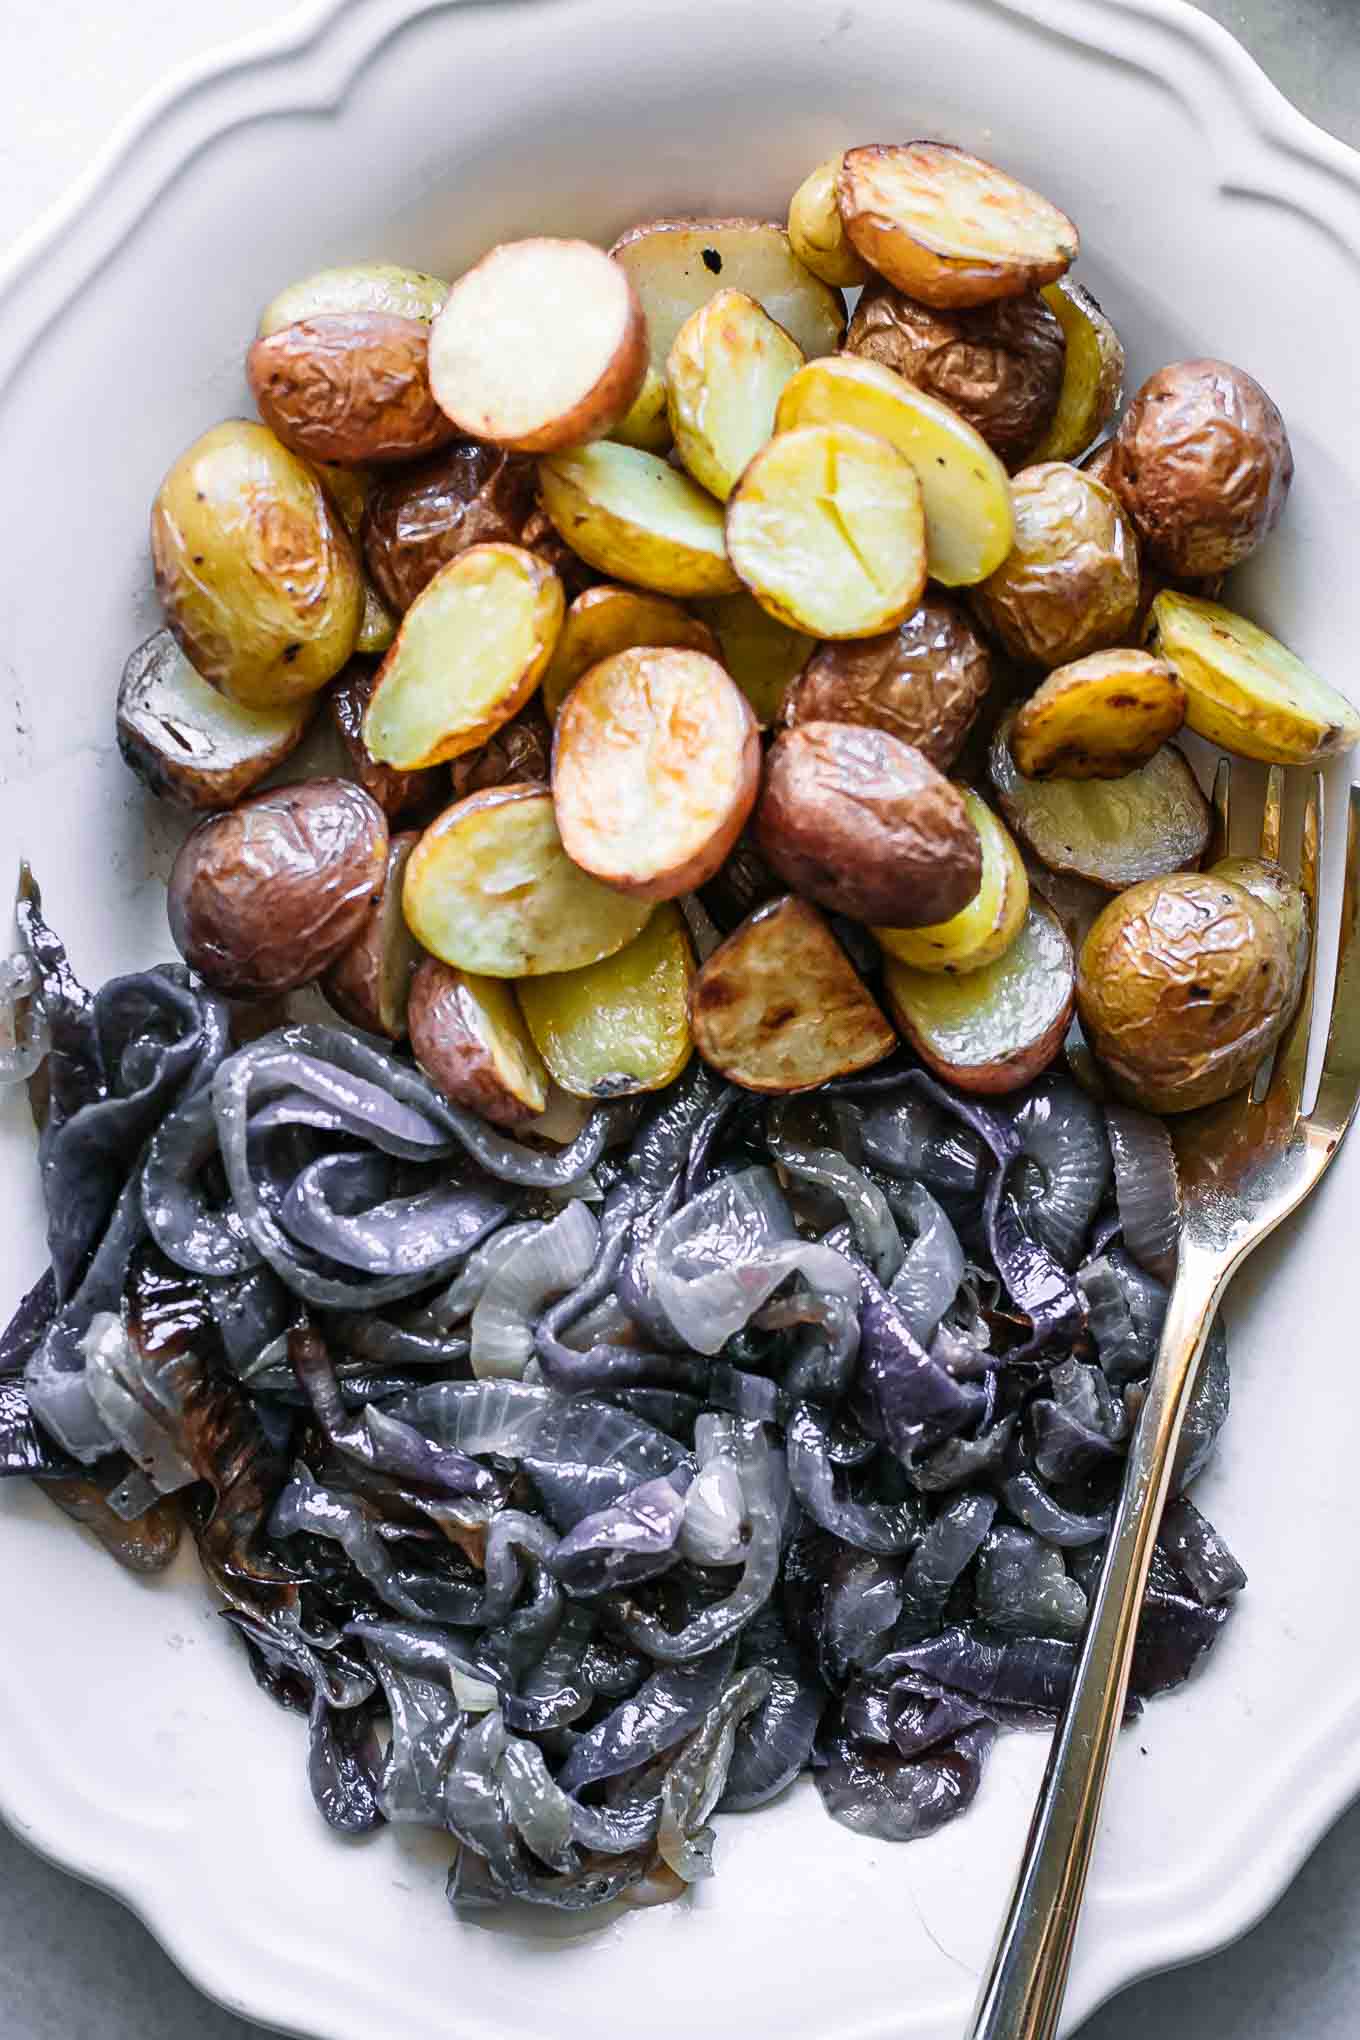 a close up of roasted potato and onions on a white plate